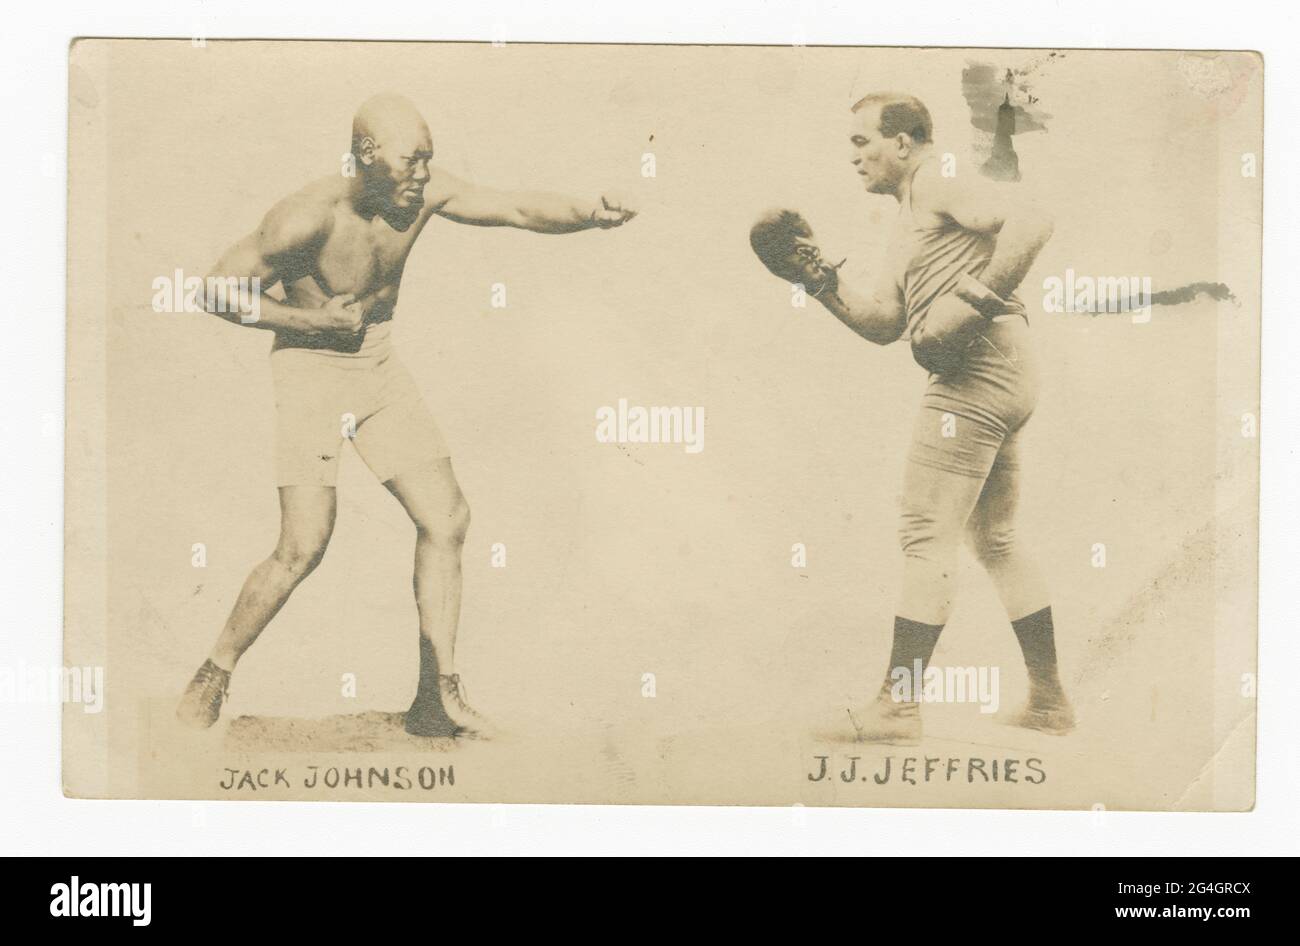 &quot;Fight of the Century&quot; between Jack Johnson and James J. Jeffries in Reno, Nevada. The boxers are pictured separately but each other. Each man's name is written below his feet. Jeffries